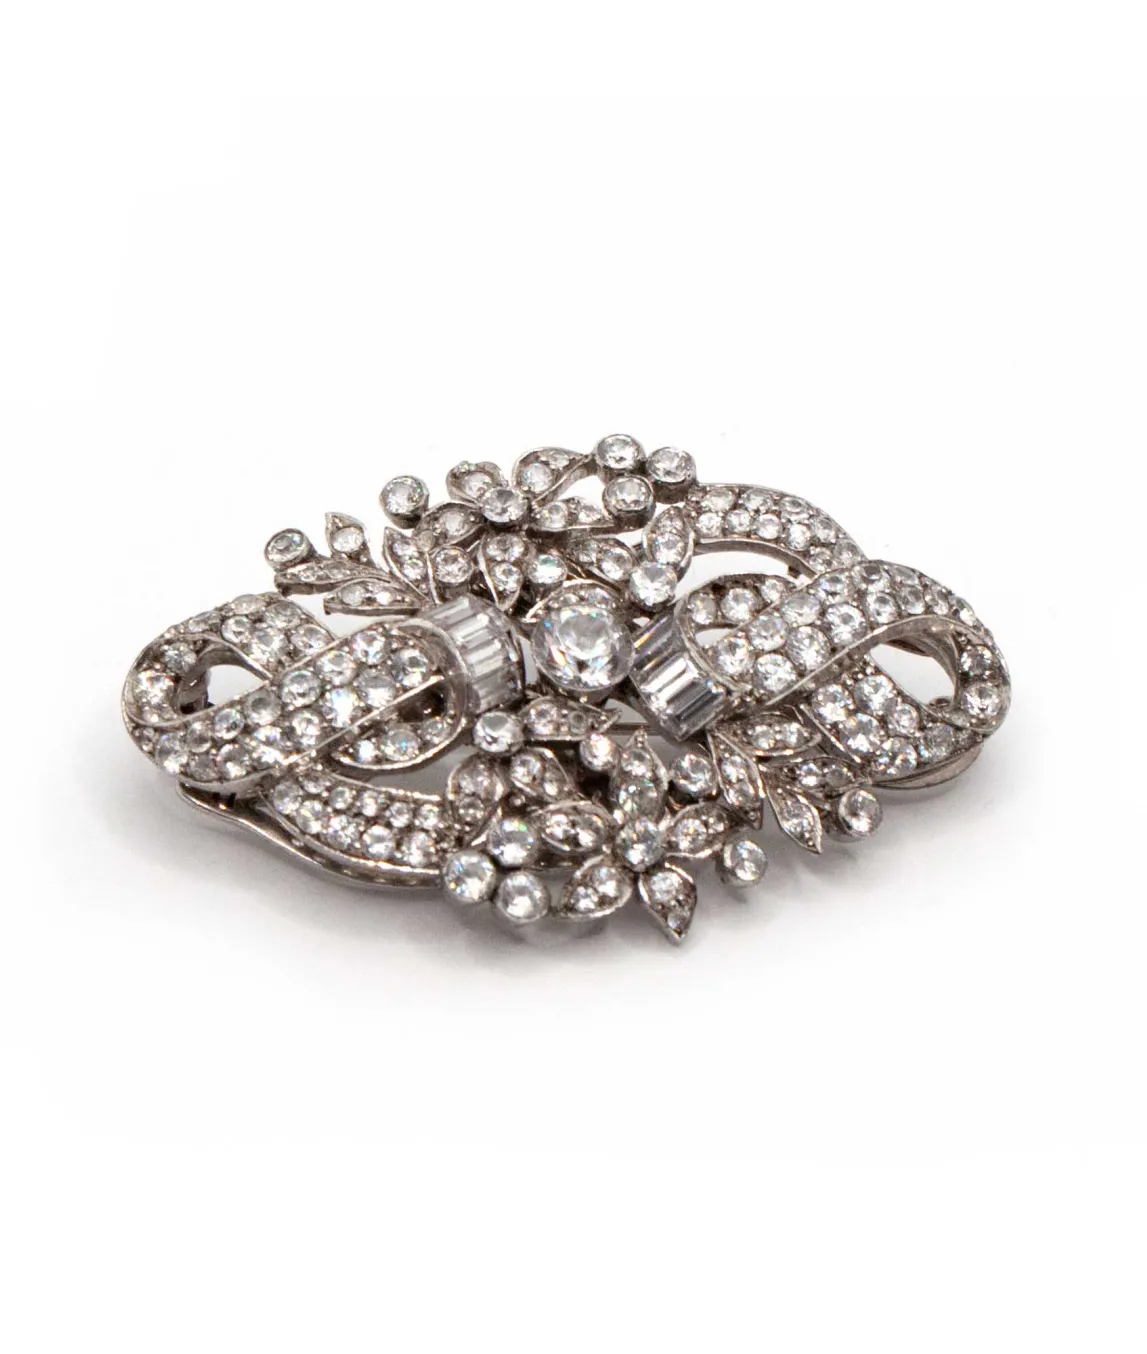 1930s colourless gem double clip brooch with floral details